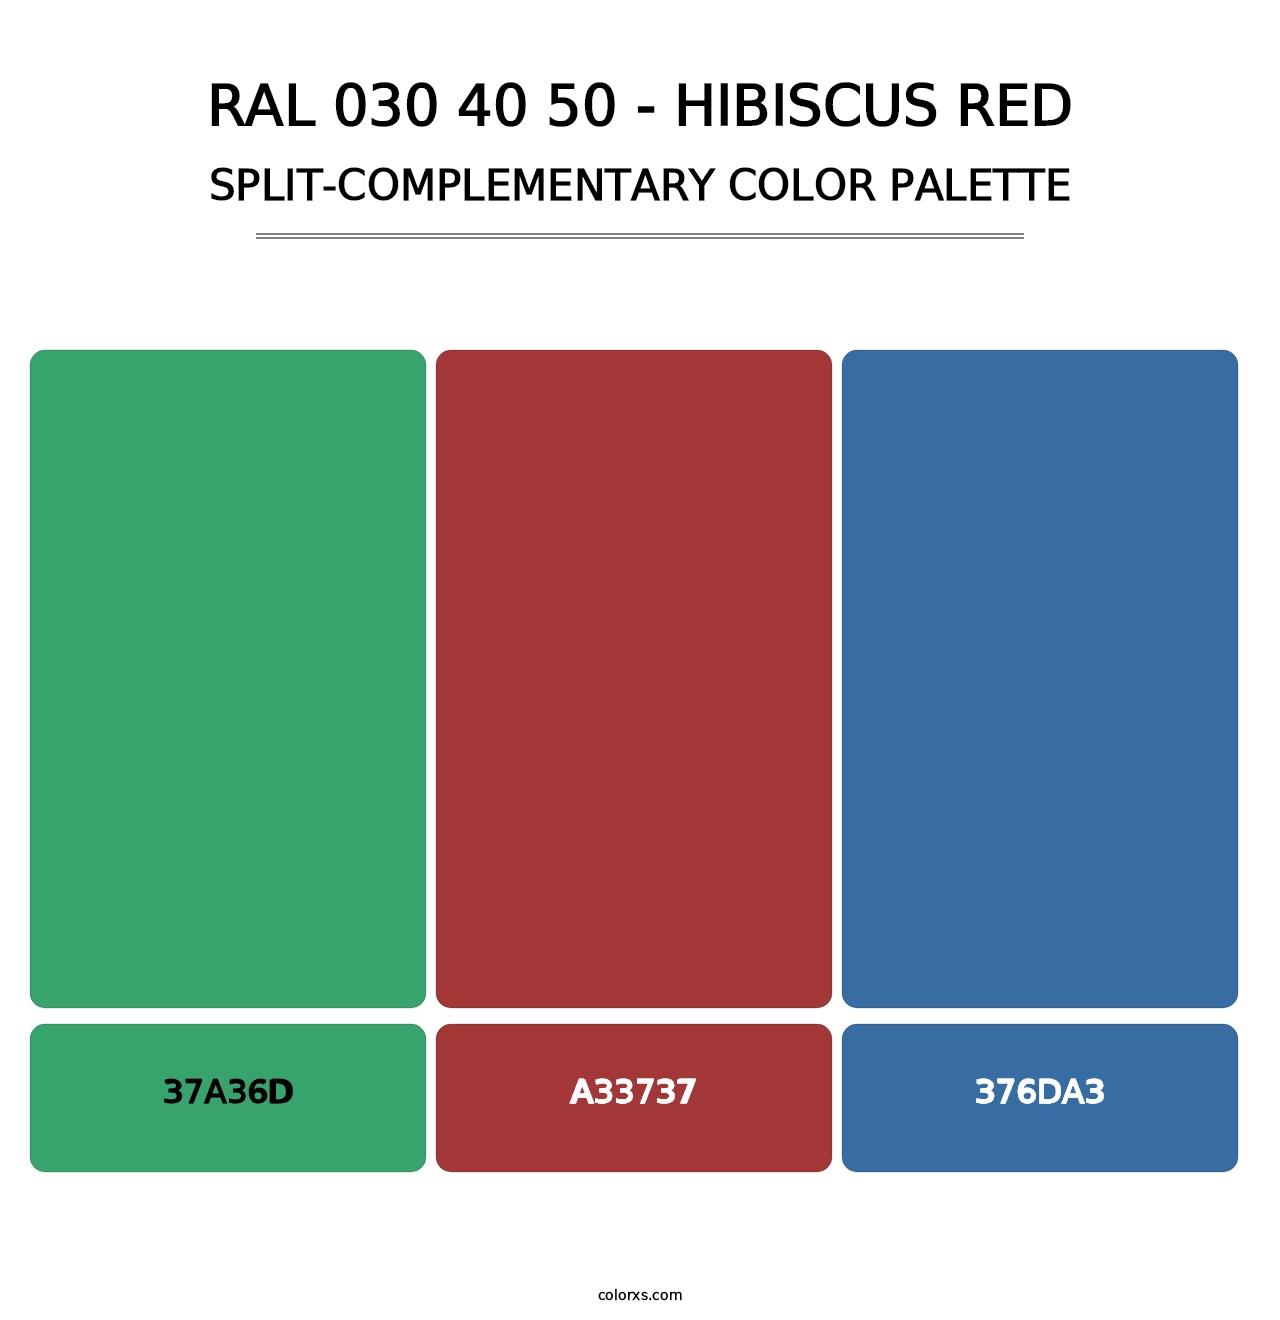 RAL 030 40 50 - Hibiscus Red - Split-Complementary Color Palette